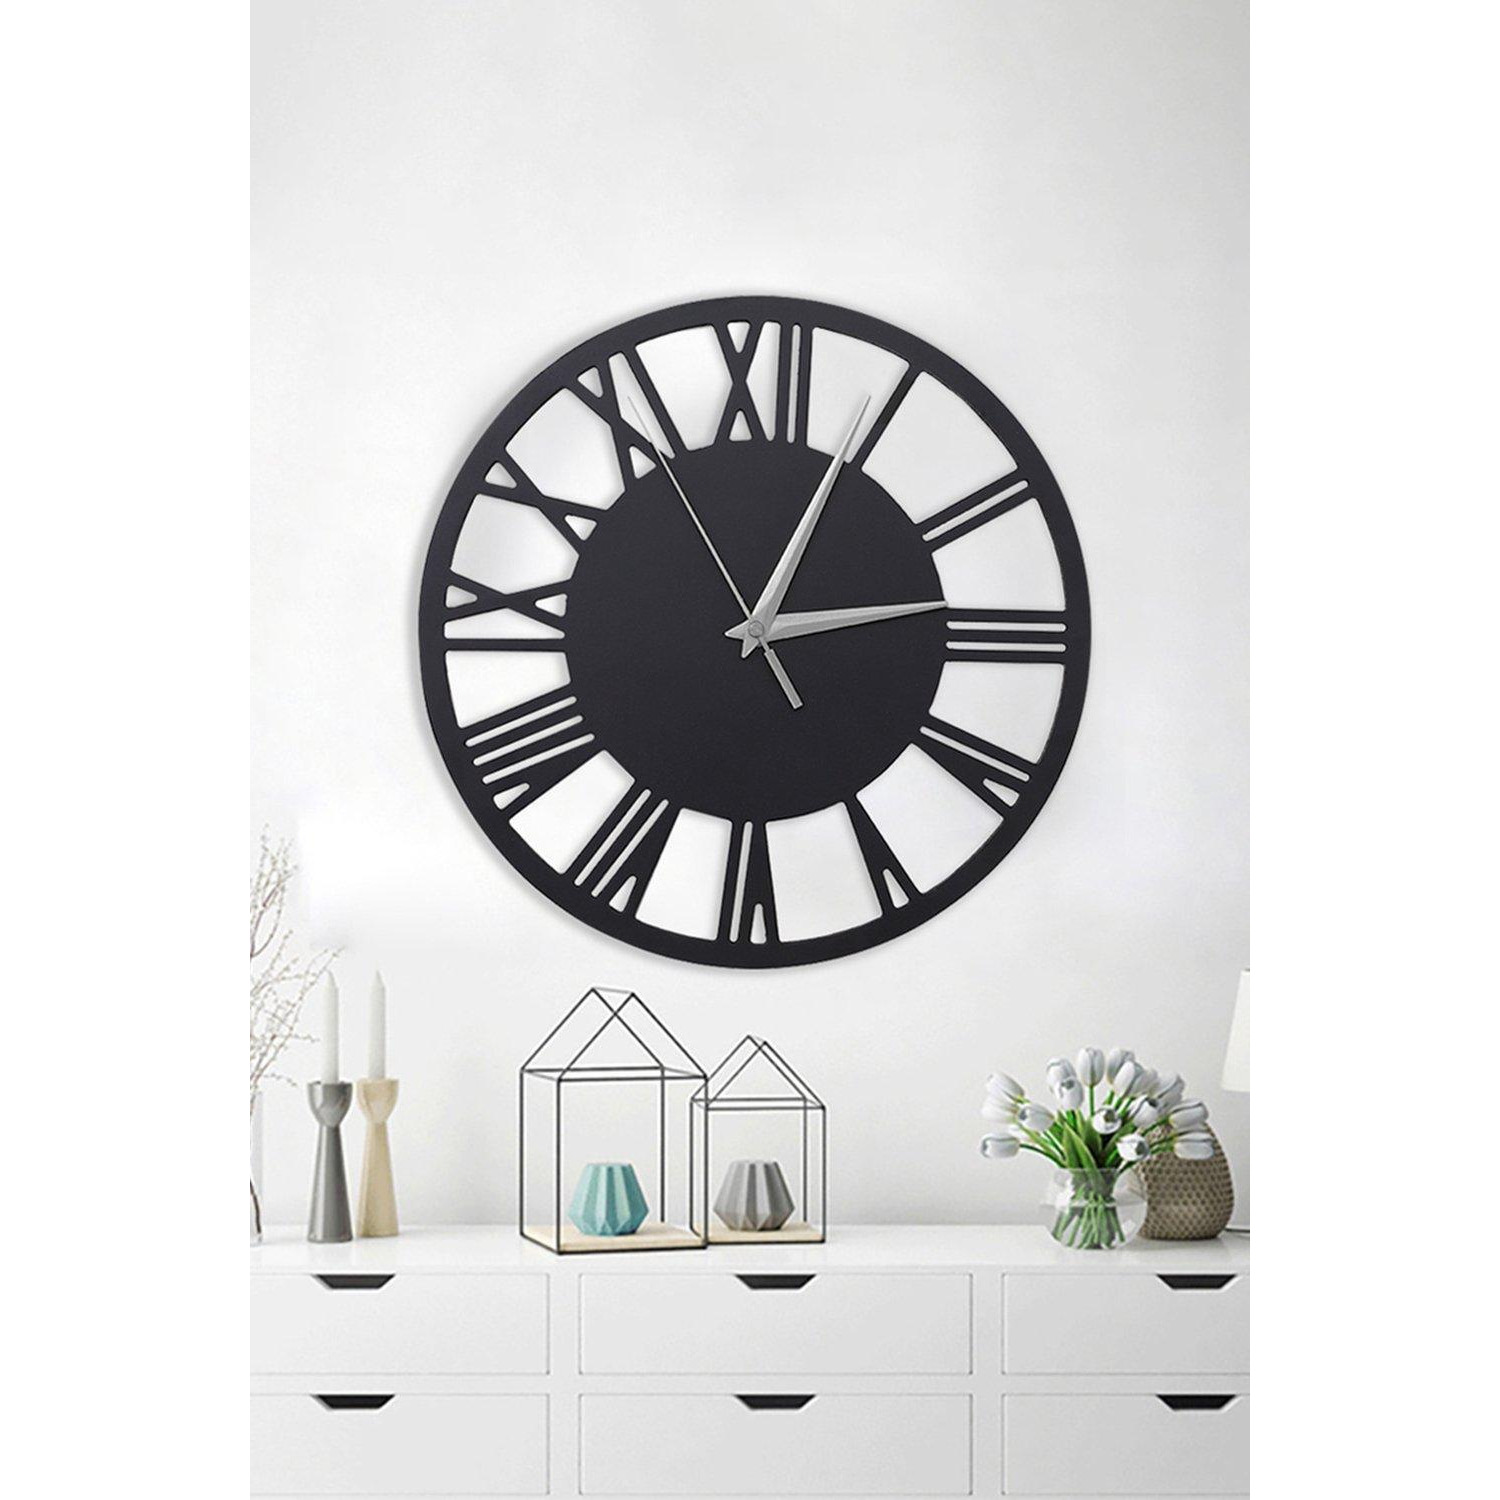 30cm Dia Round Roman Numeral Decorative Wall Clock with Silver Needle - image 1